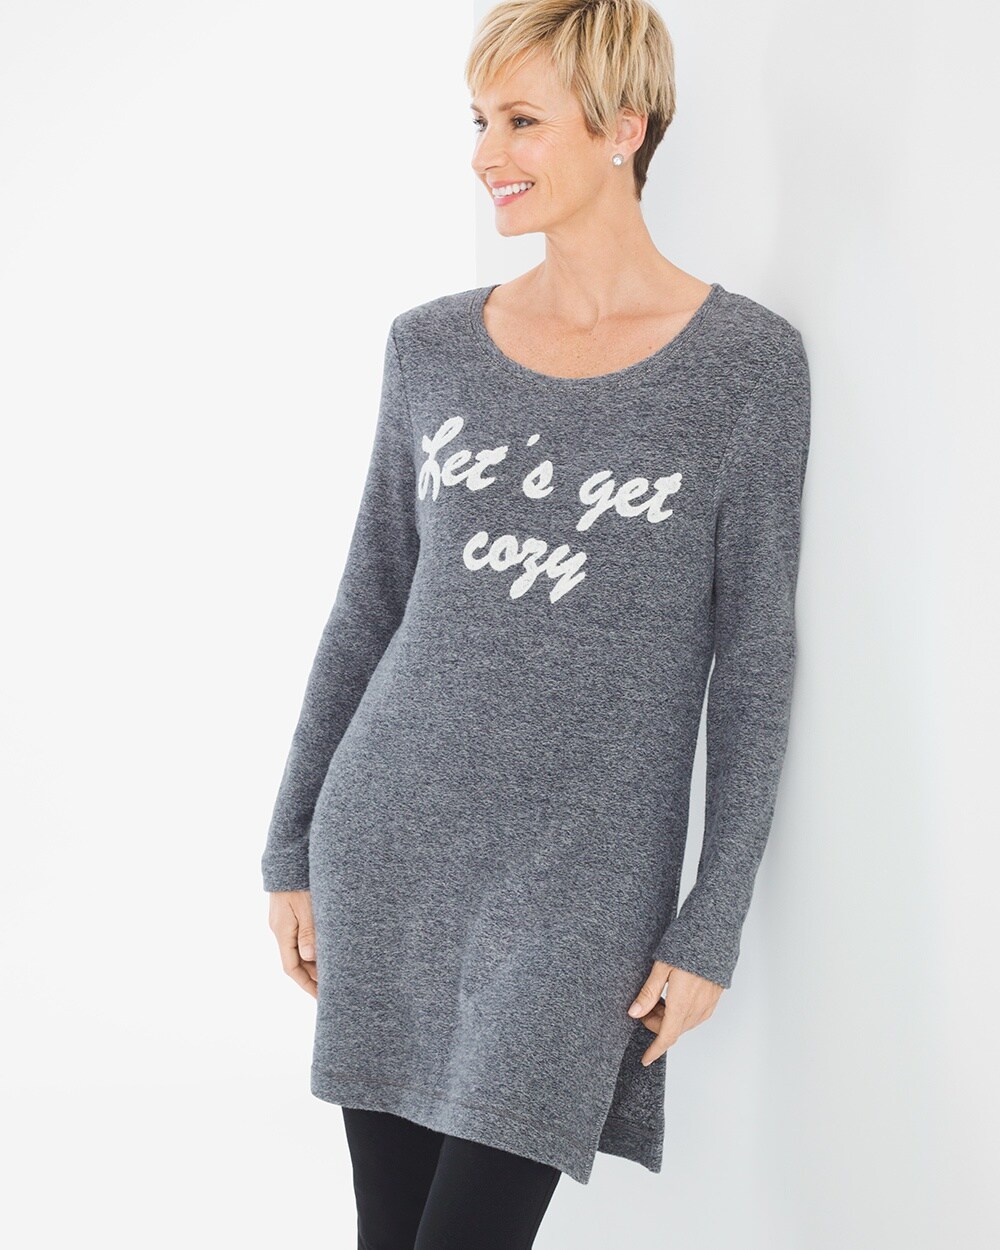 Zenergy Knit Collection Let's Get Cozy Tunic